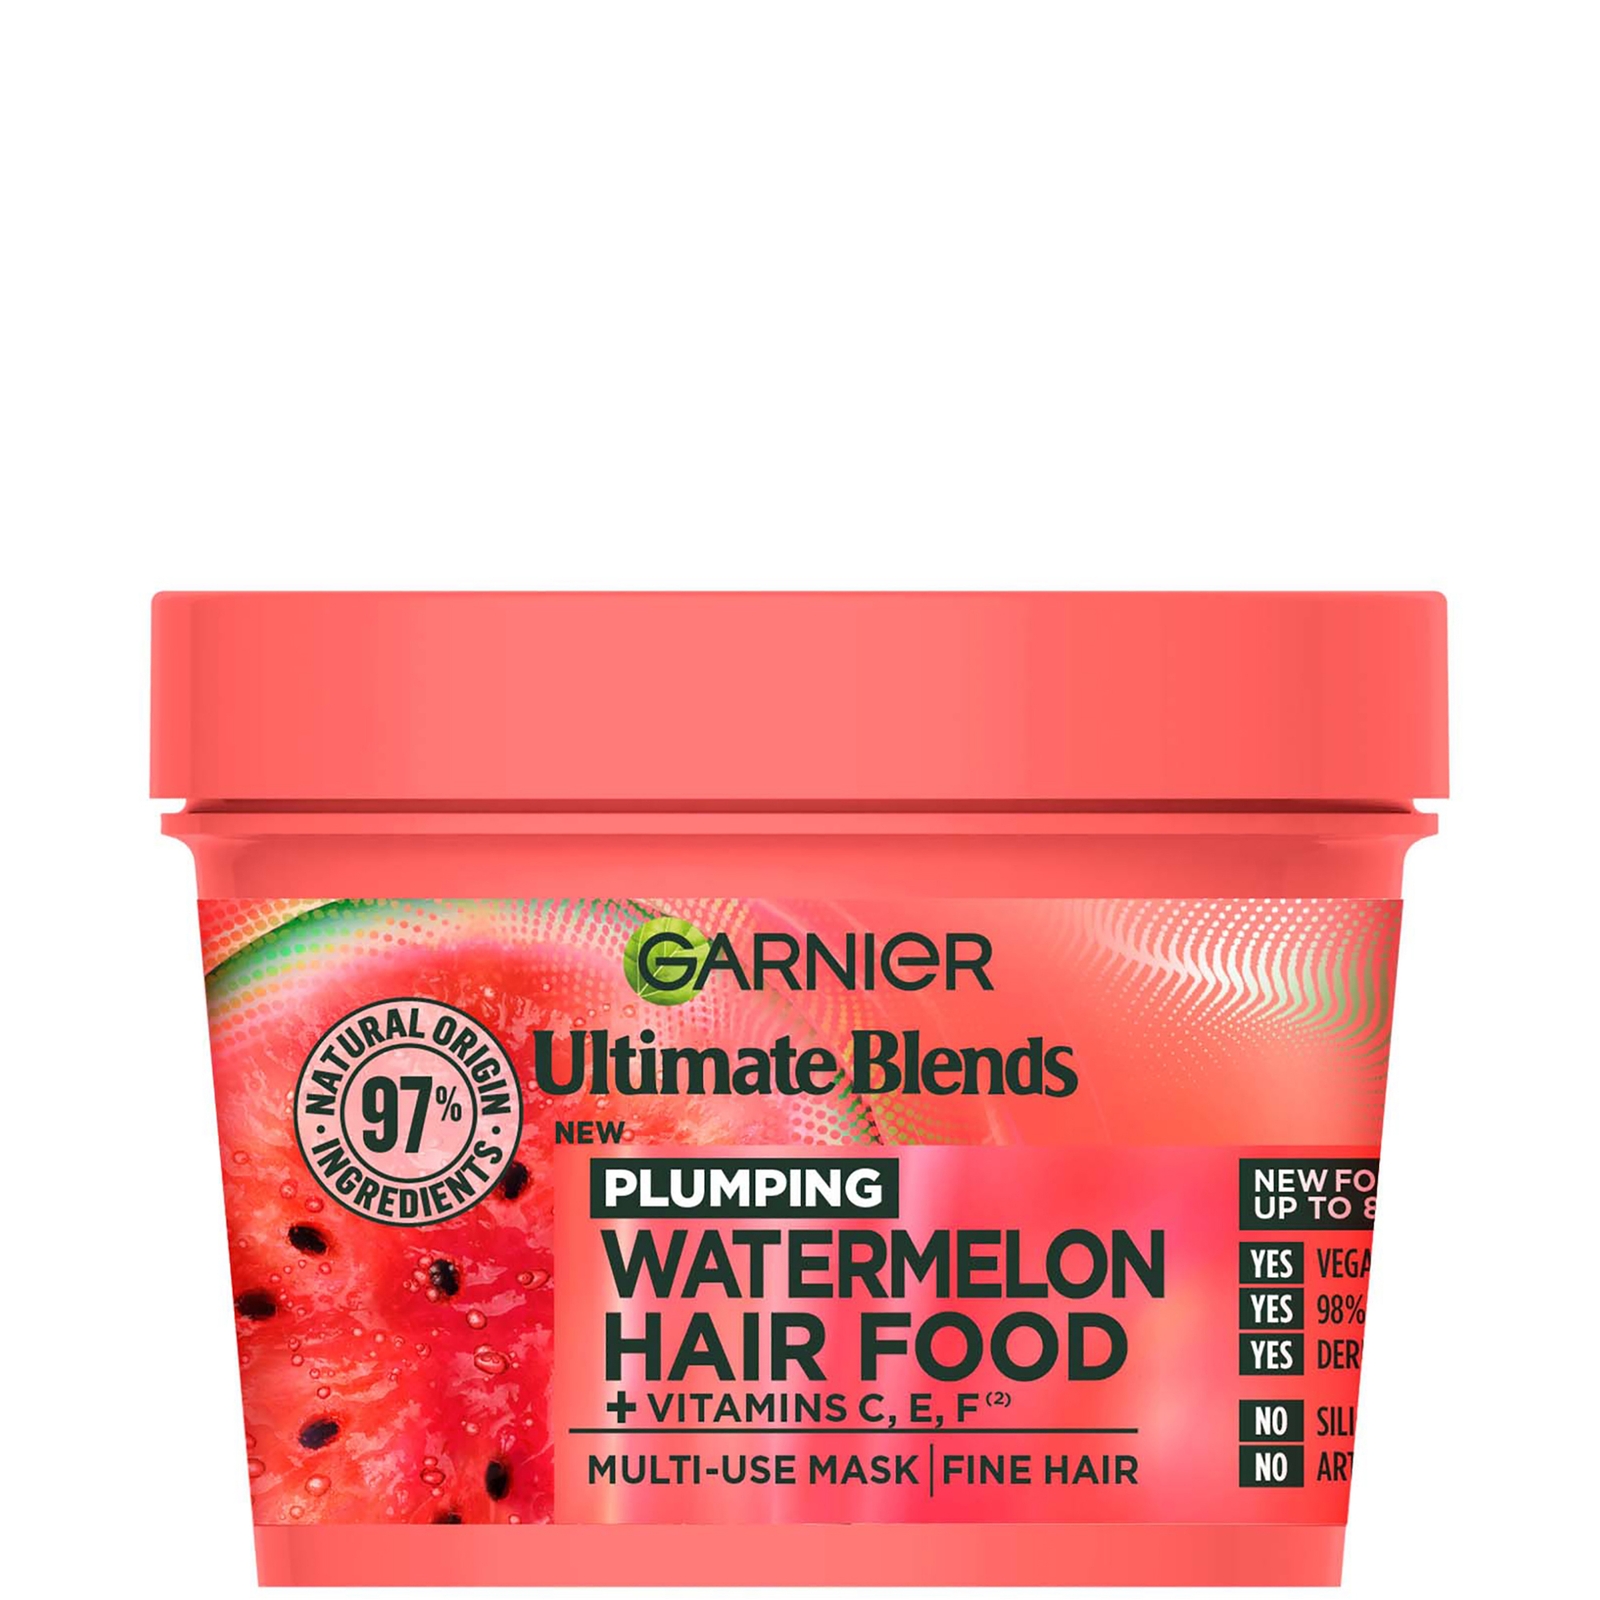 Image of Garnier Ultimate Blends Plumping Hair Food Watermelon 3-in-1 Mask Treatment 390ml